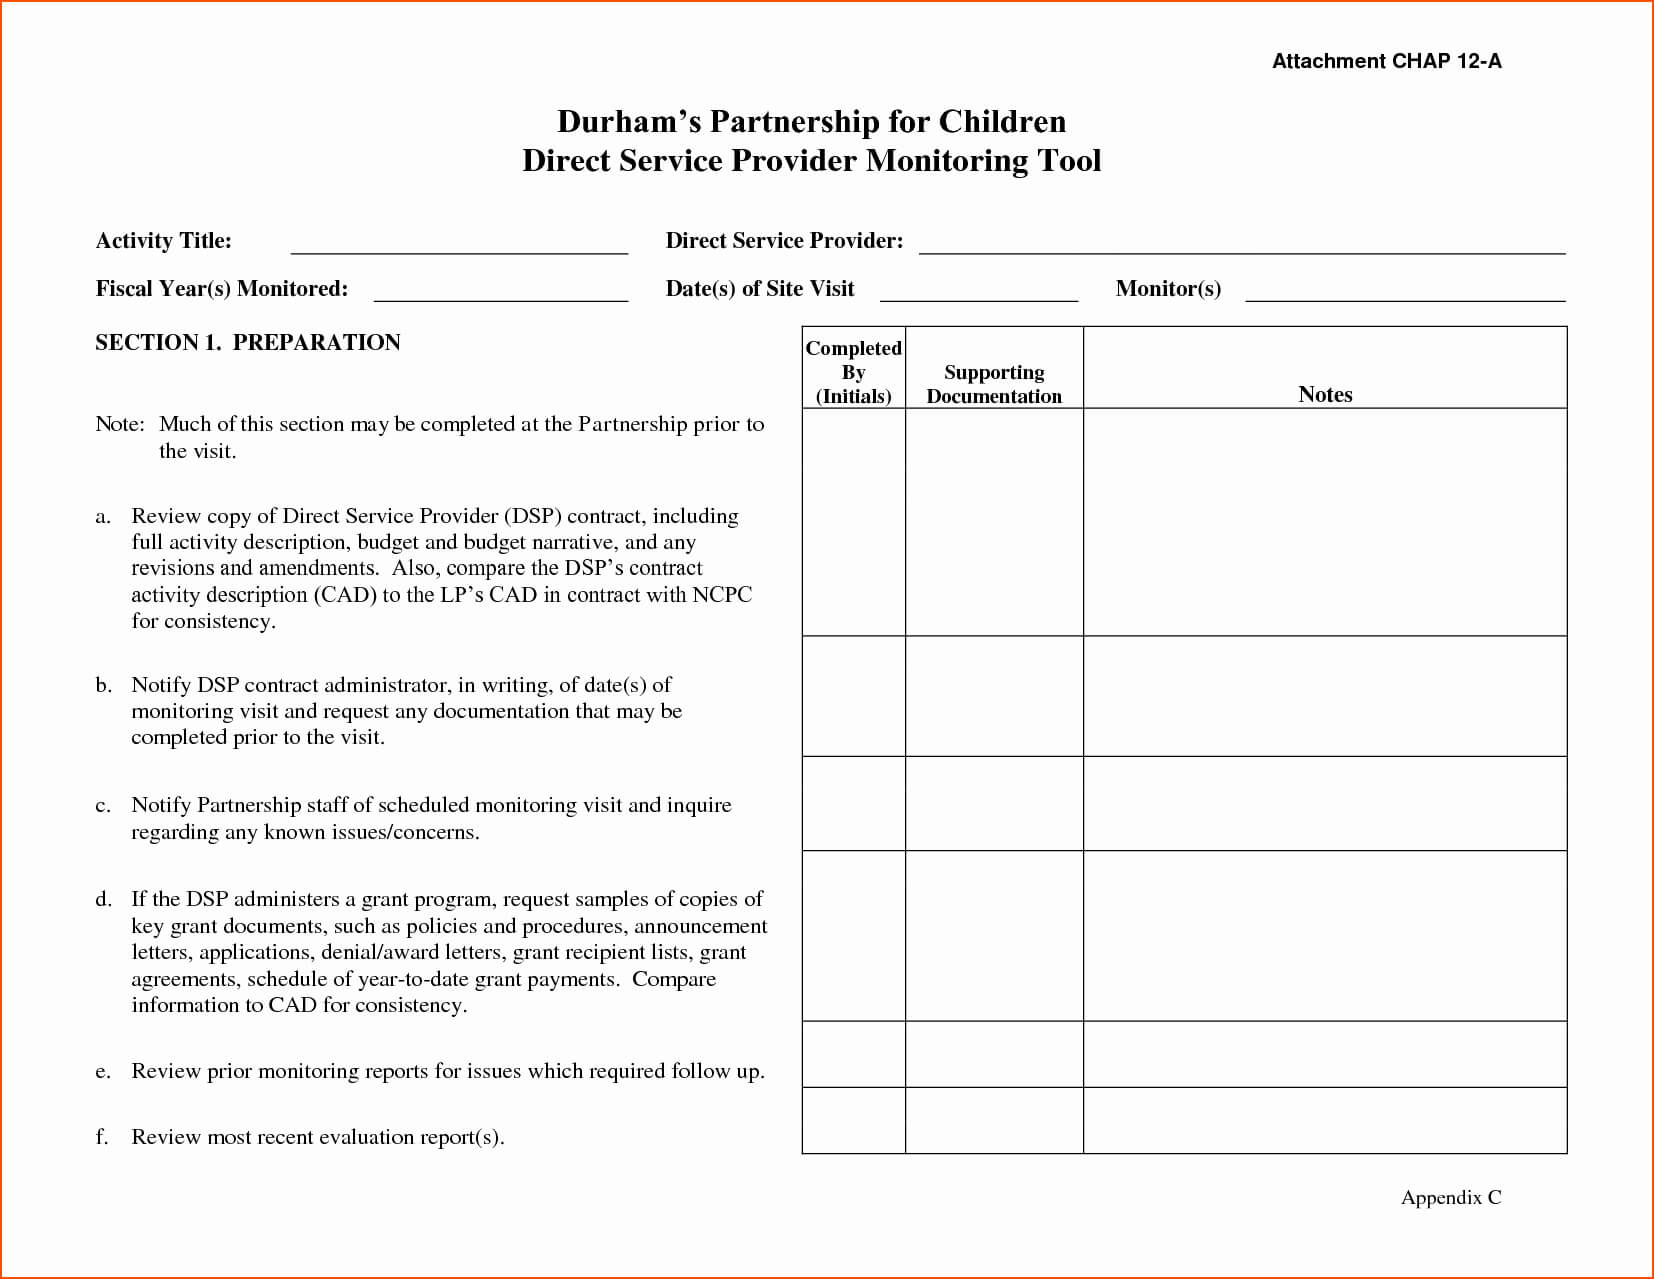 045 Daily Activity Report Template Ideas Weekly Regarding Daily Activity Report Template